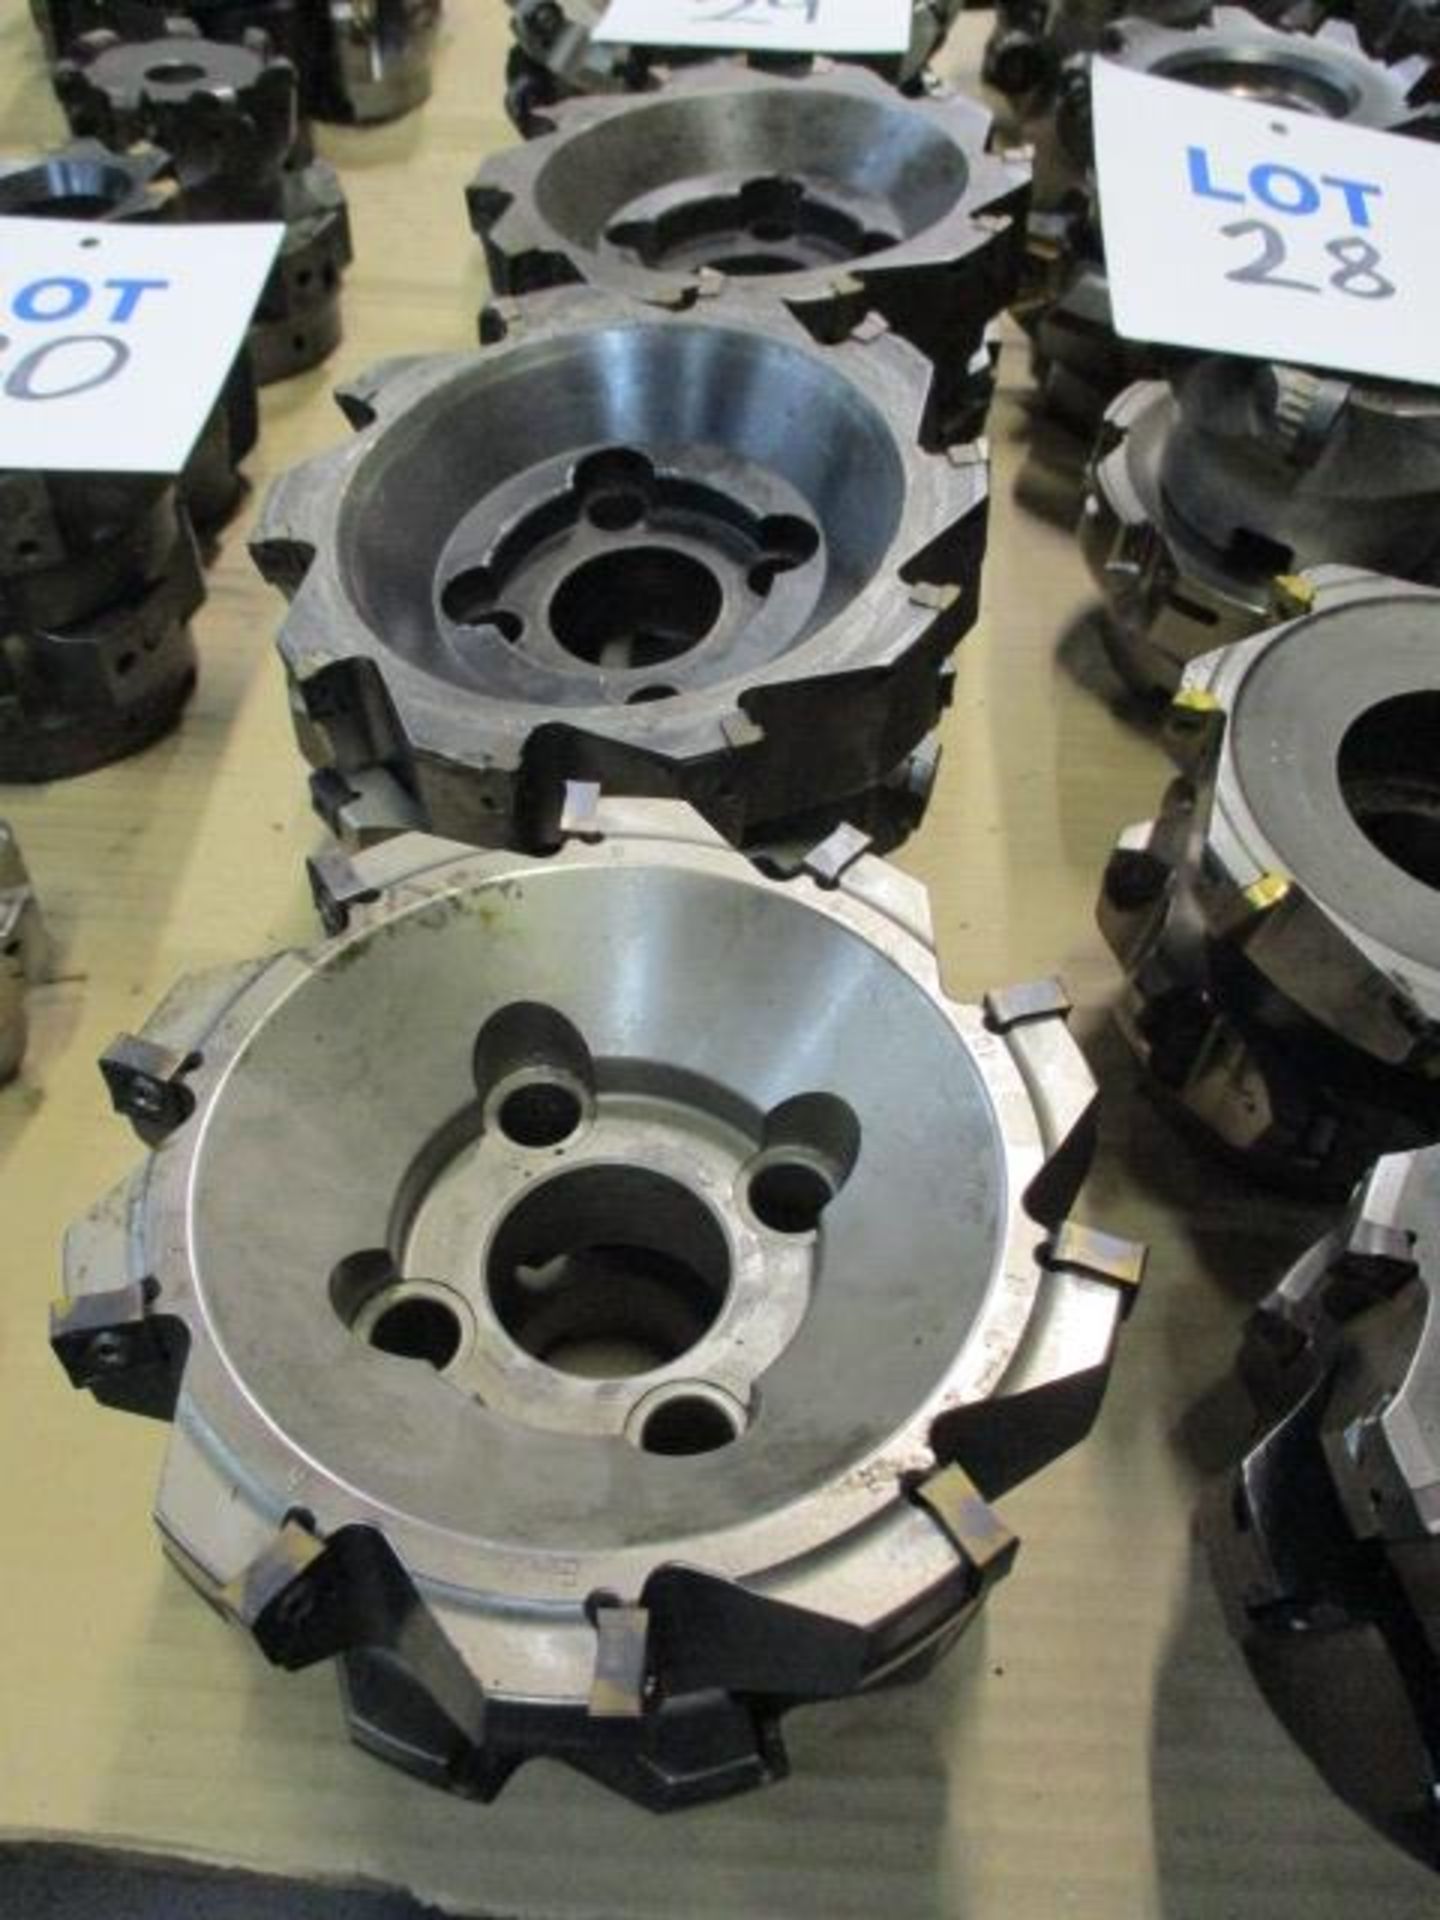 Indexable carbide milling cutters - Image 2 of 3